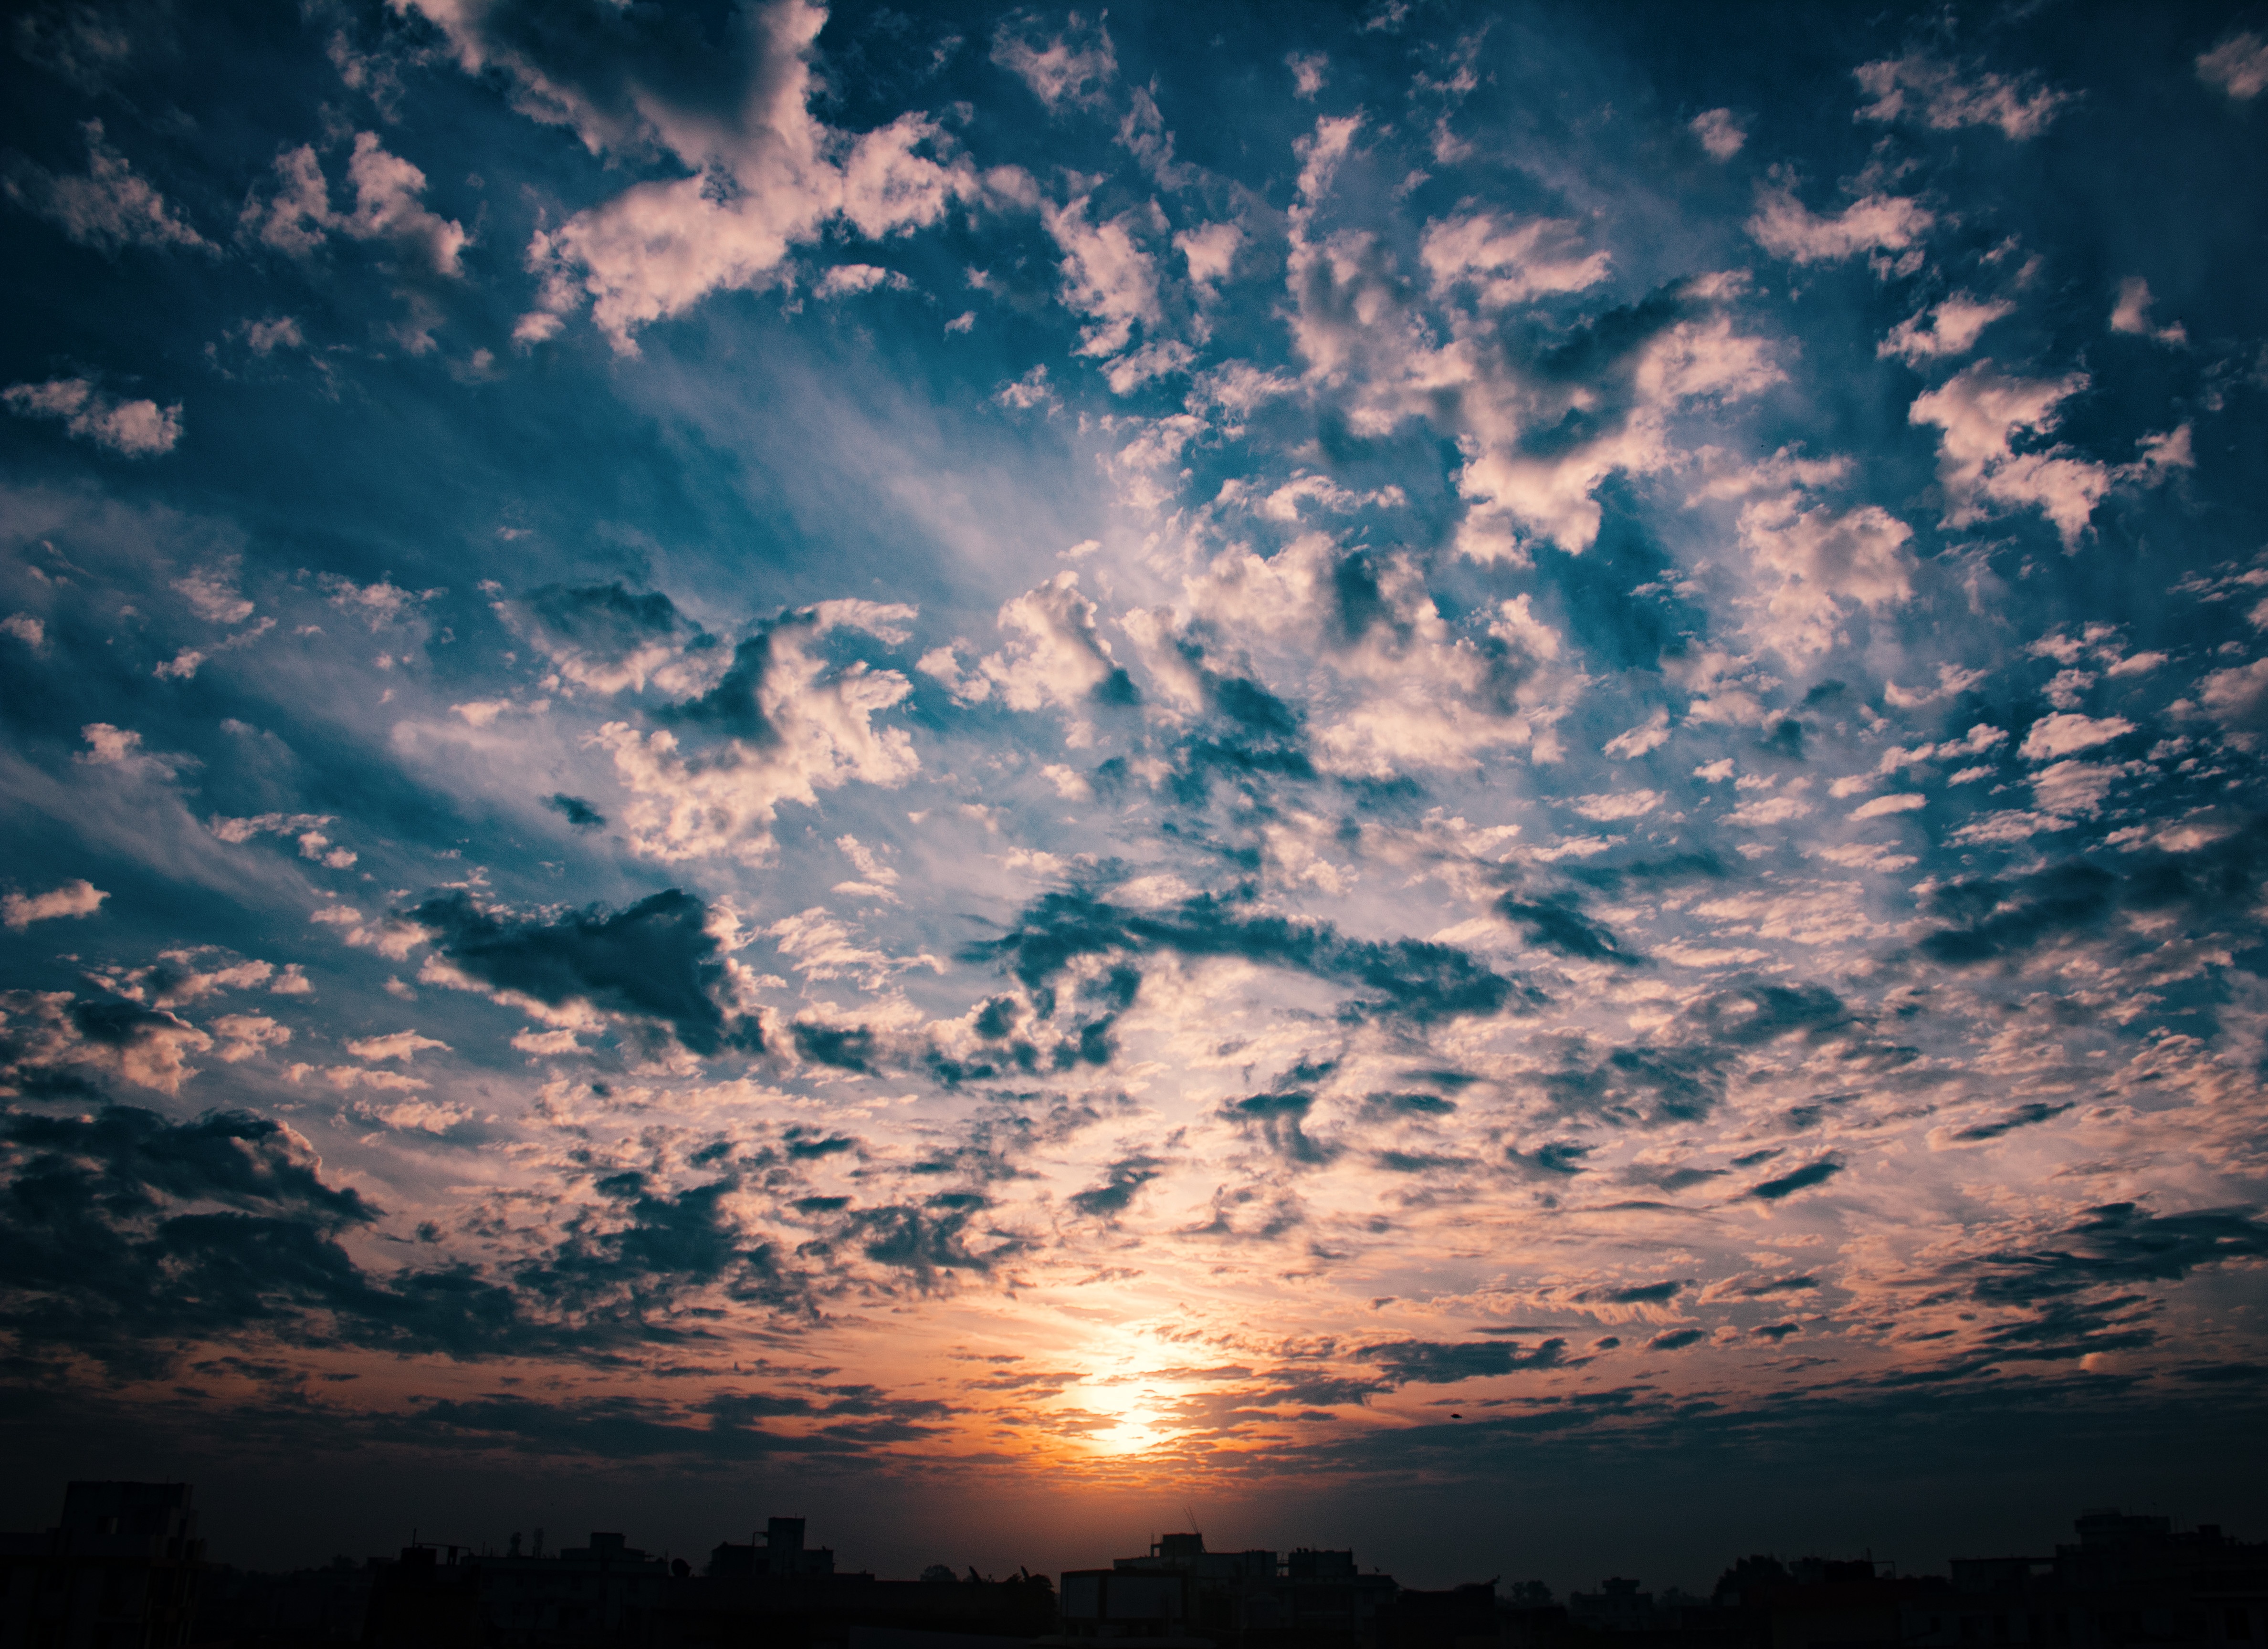 sunset, nature, sky, clouds images